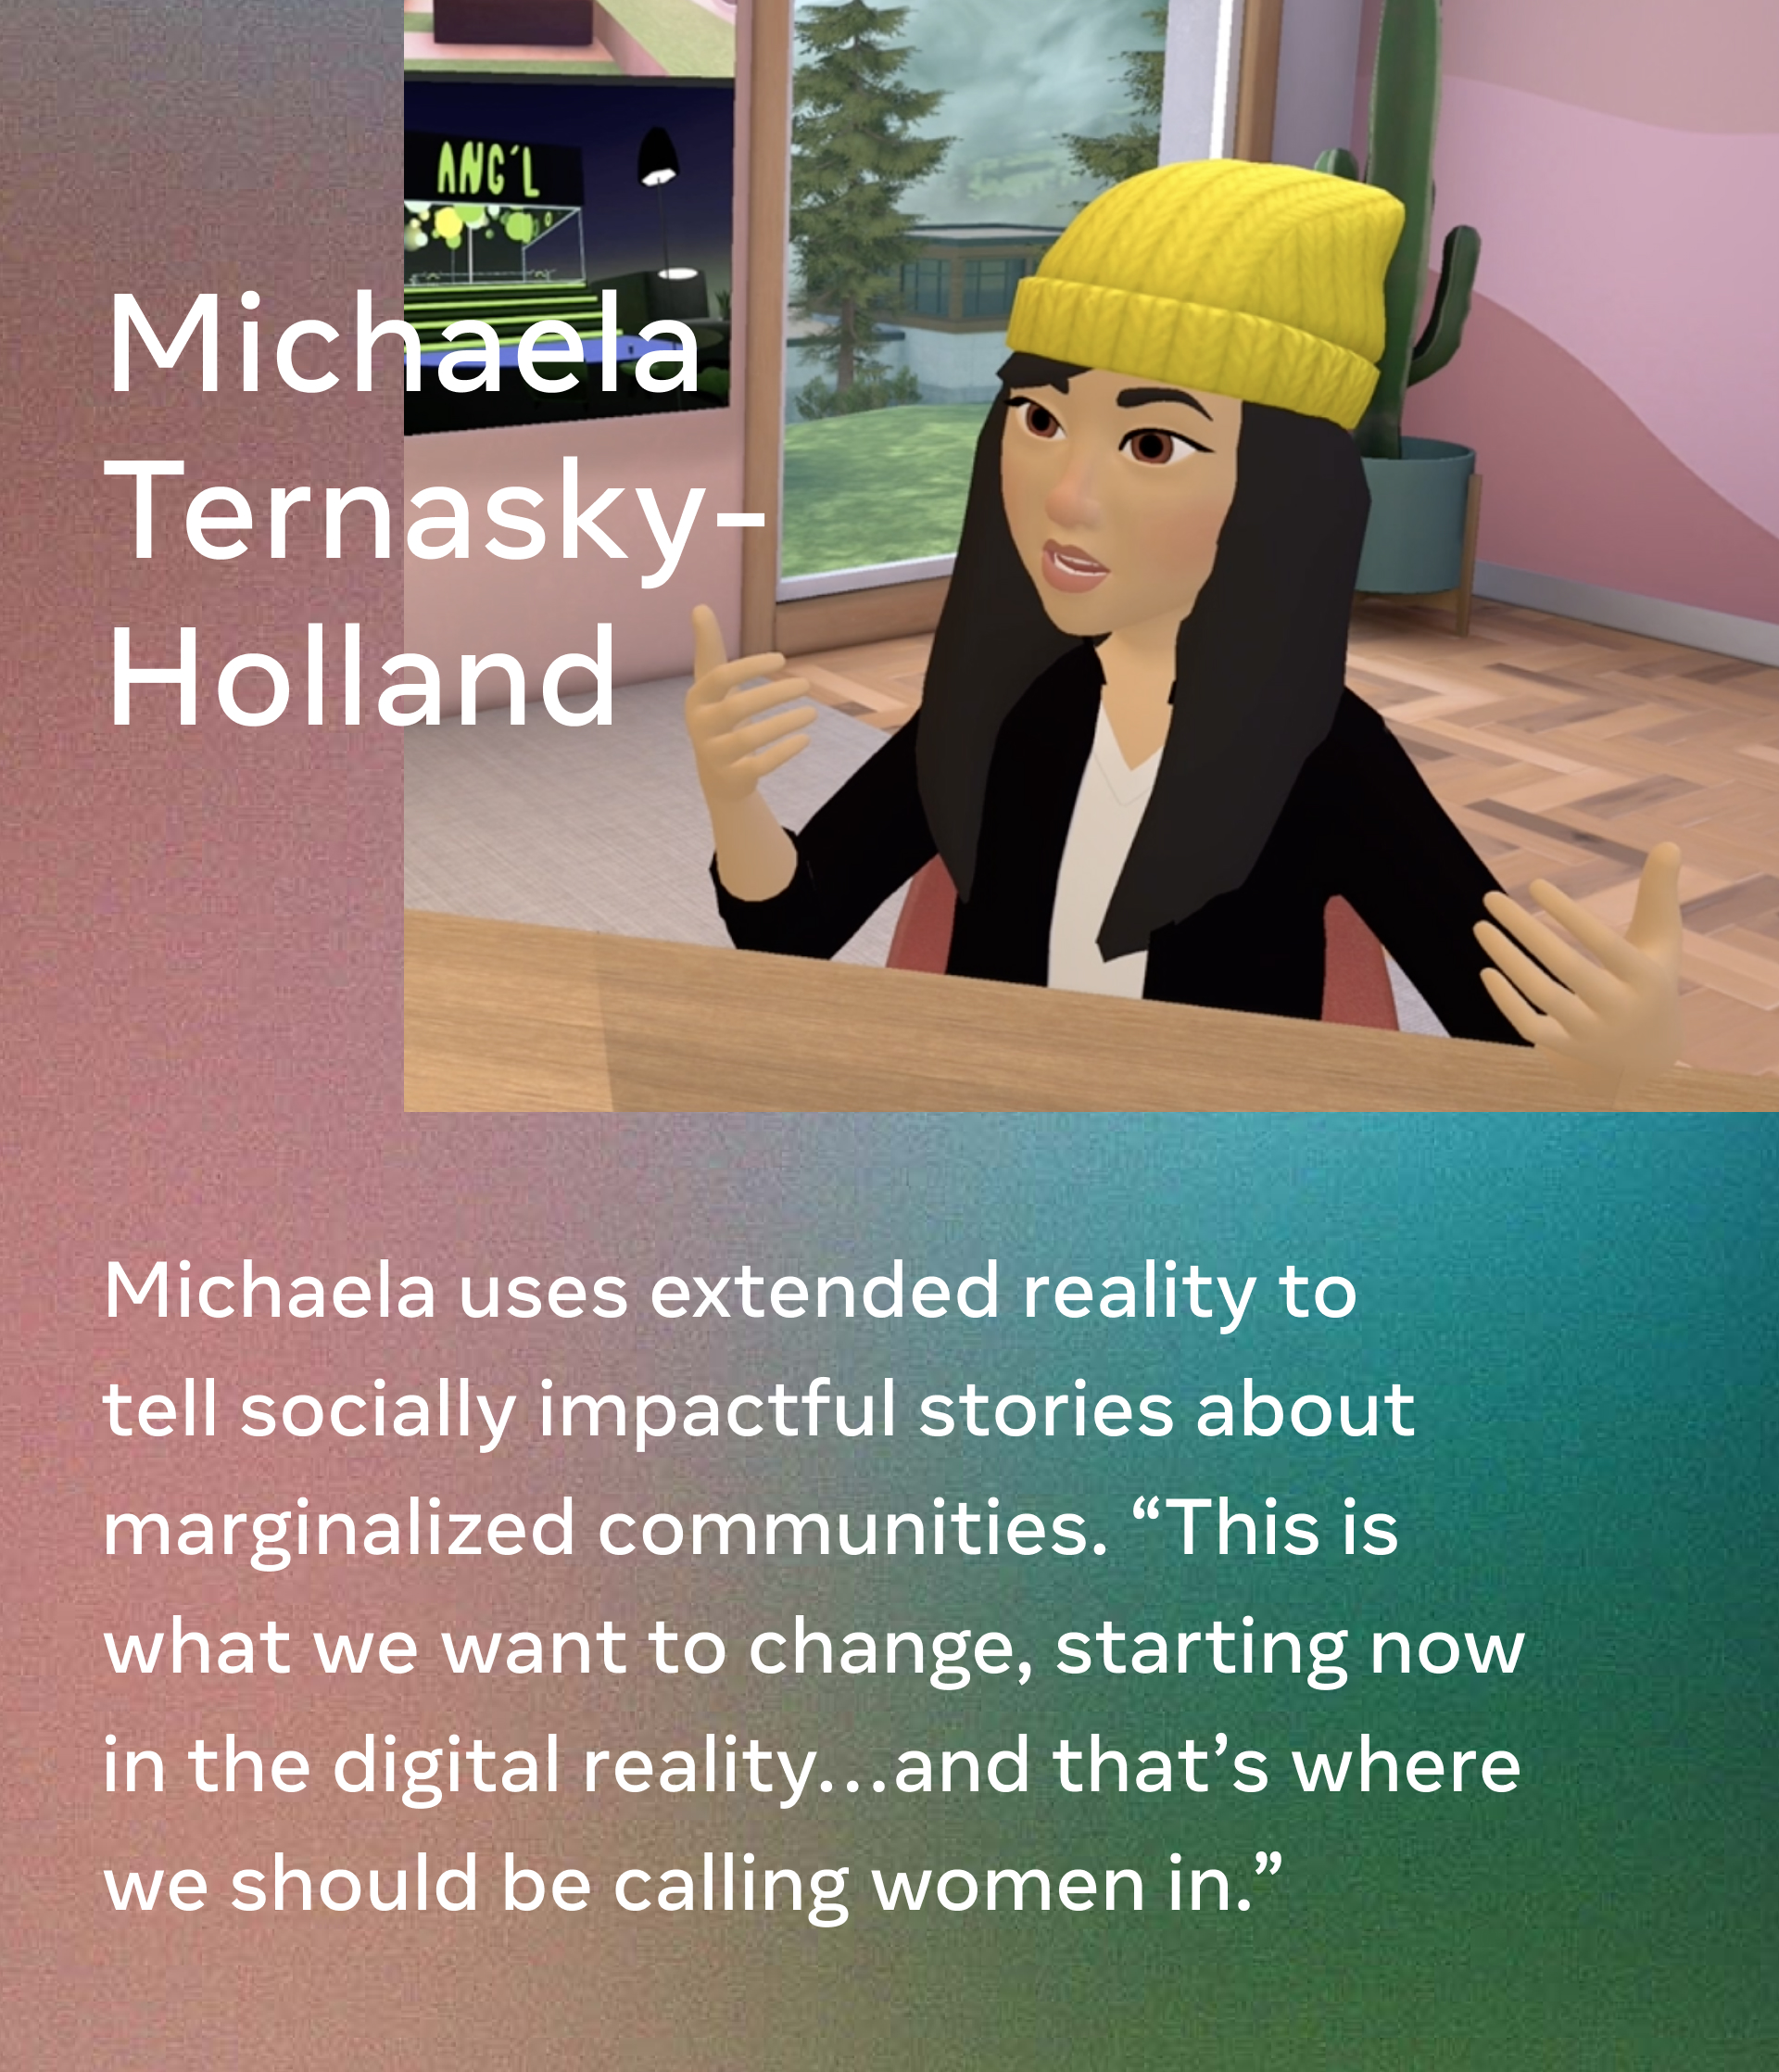 Michaela Ternasky-Holland. Michaela uses extended reality to tell socially impactful stories about marginalized communities. “This is what we want to change, starting now in the digital reality…and that’s where we should be calling women in.”